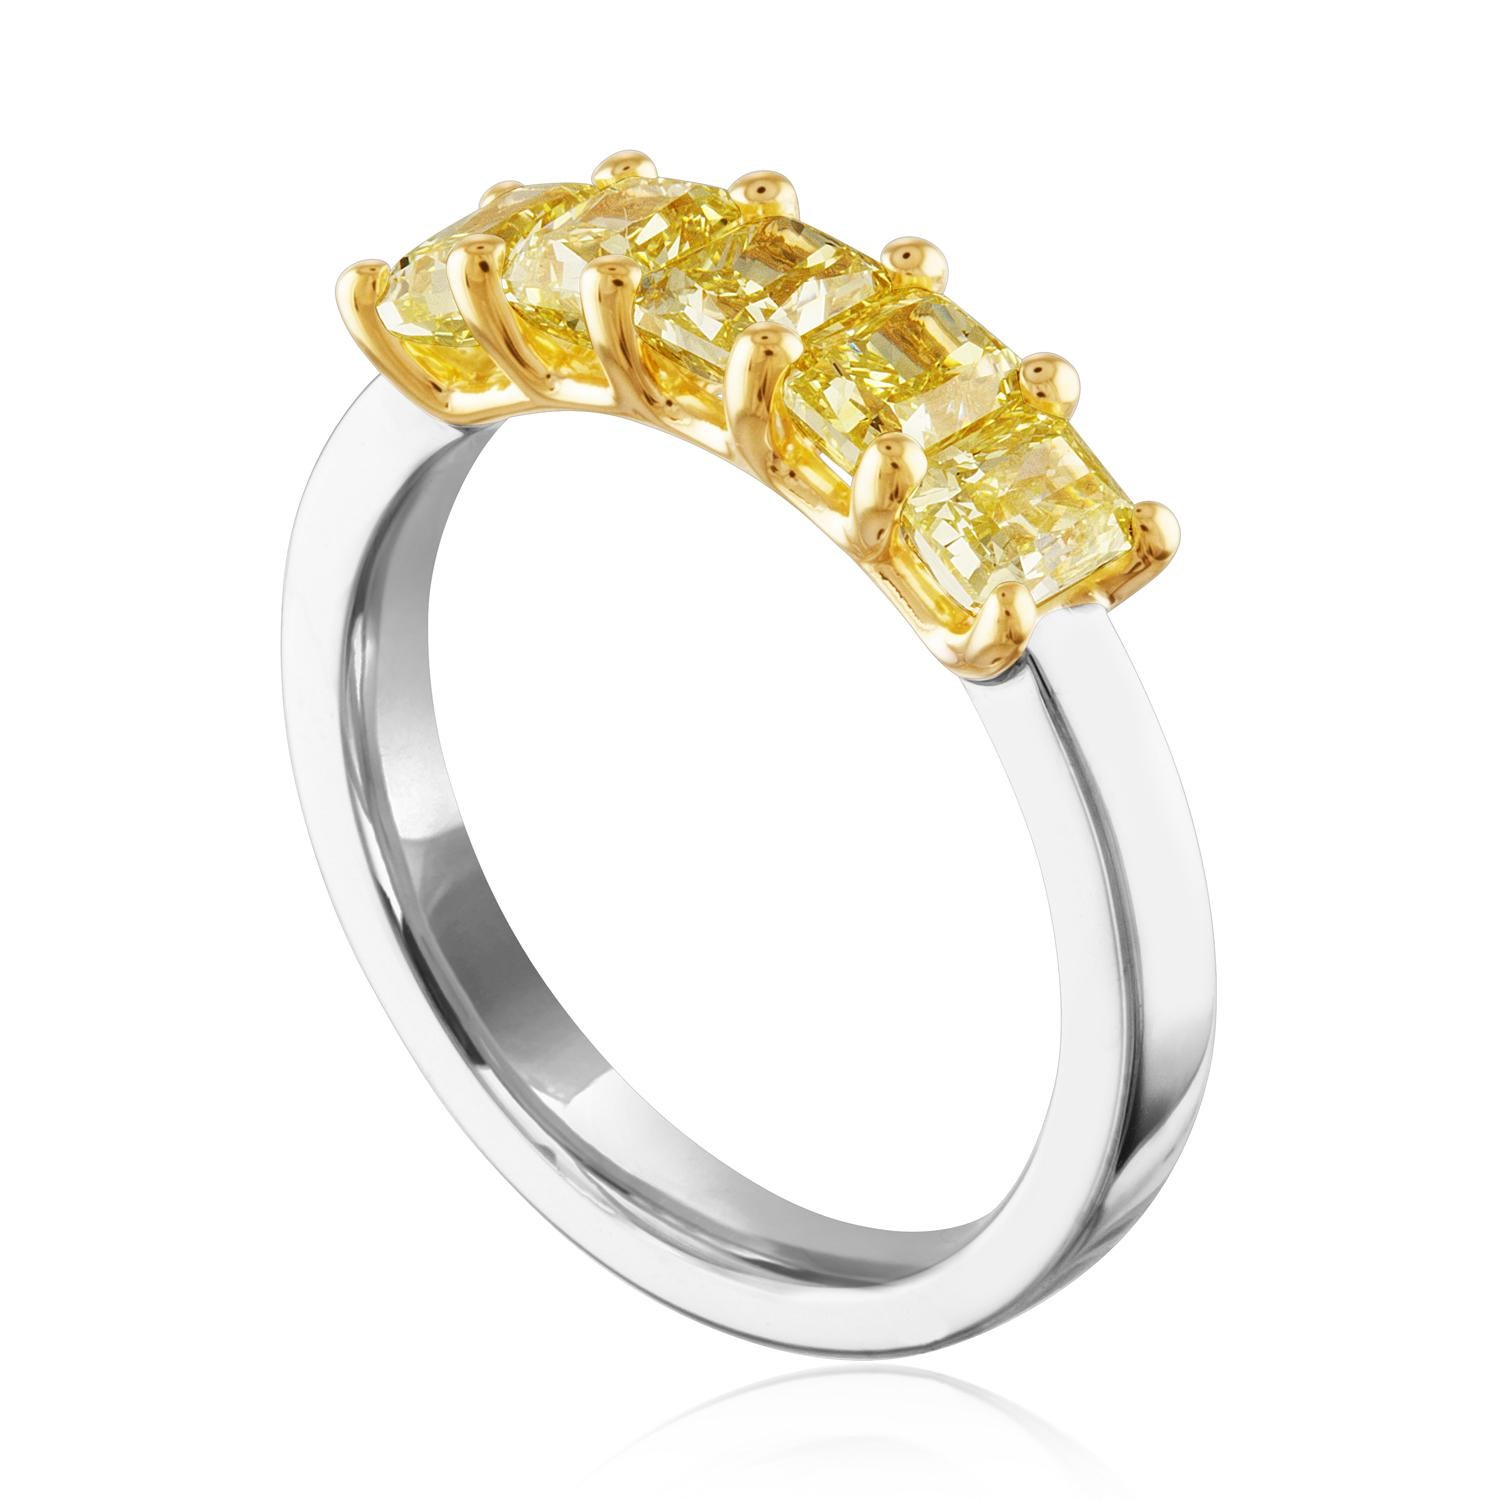 Very Beautiful Diamond 5 Stone Half Band Ring
The ring is 18K Yellow Gold & PLT 950
There are 5 Radiant Cut Fancy Yellow Diamonds Prong Set.
There are 1.70 Carats In Diamonds VS
The ring is a size 6, sizable.
The band is 5.1 mm wide.
The ring weighs